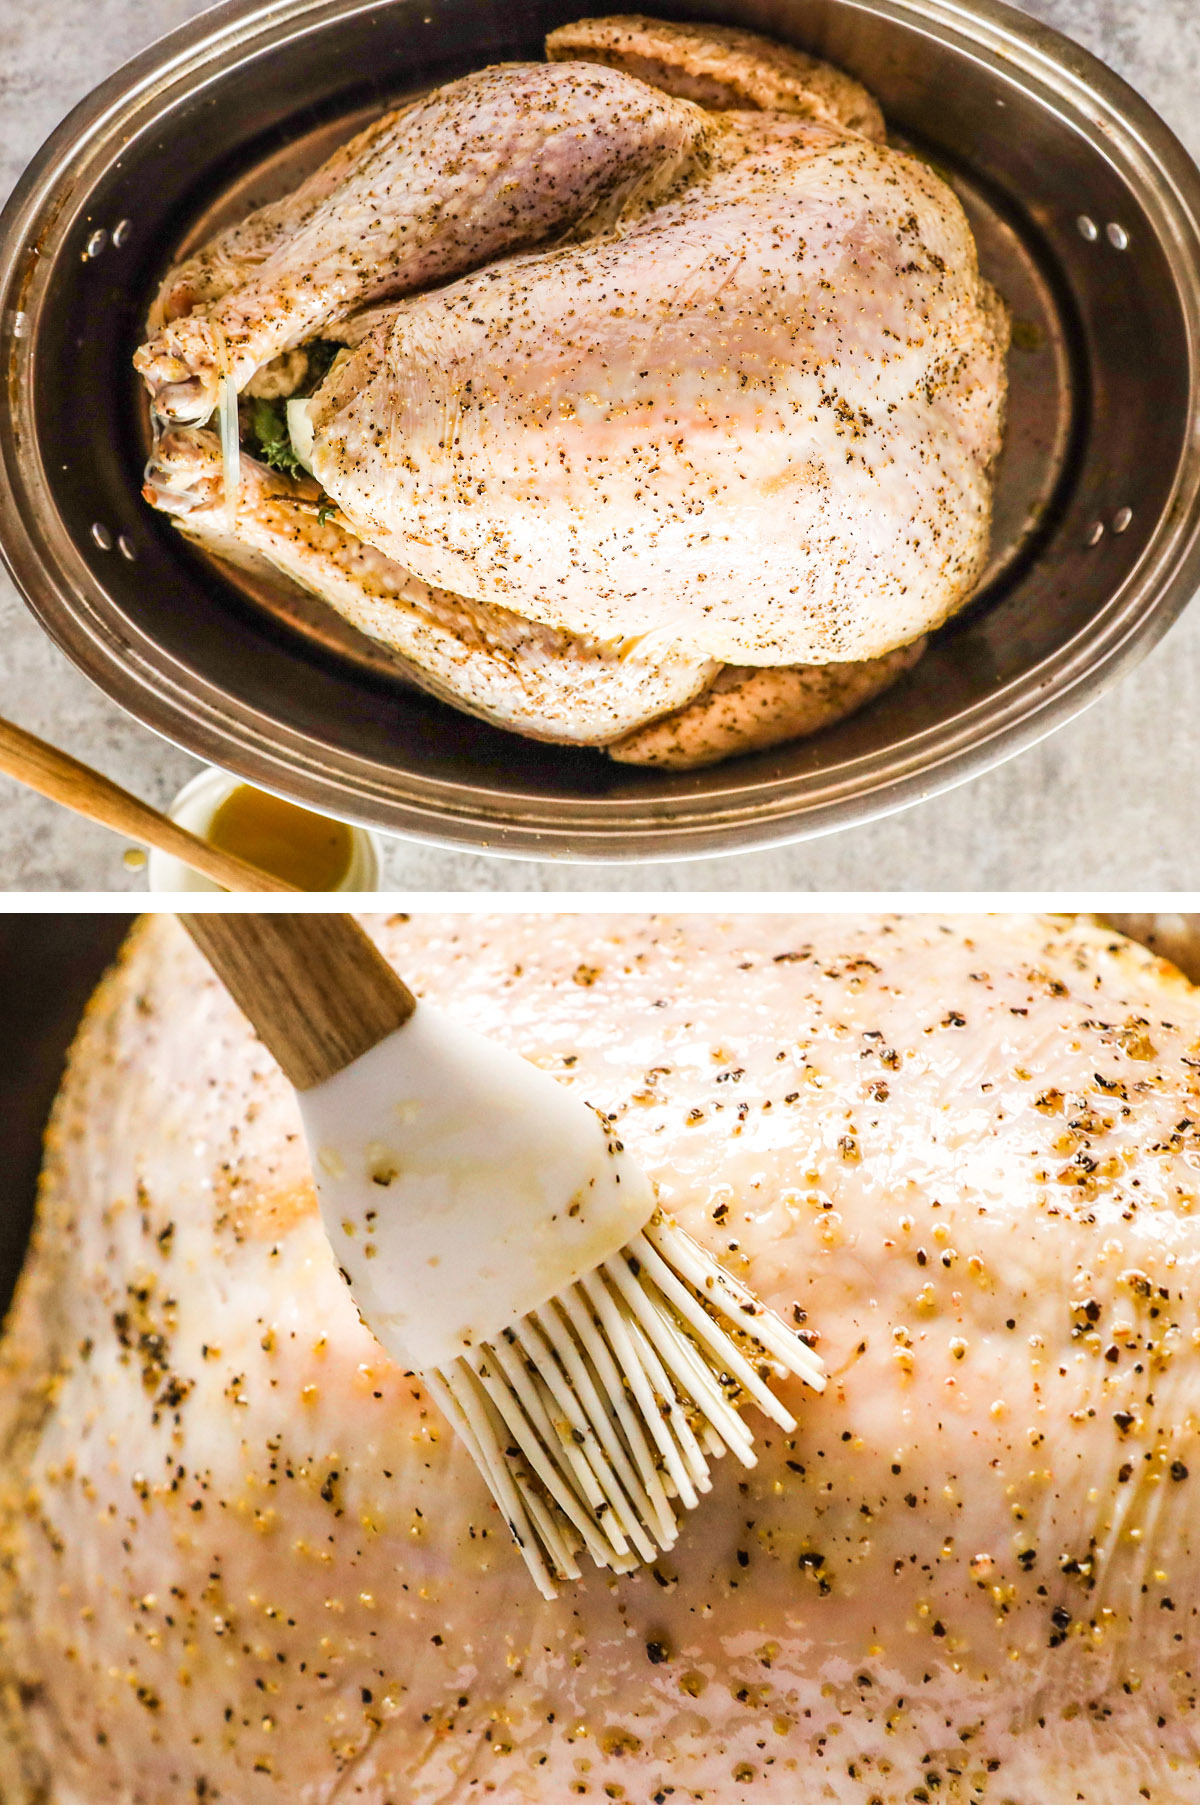 Raw turkey in a roasting pan, and close up of a silicone brush on the turkey skin.